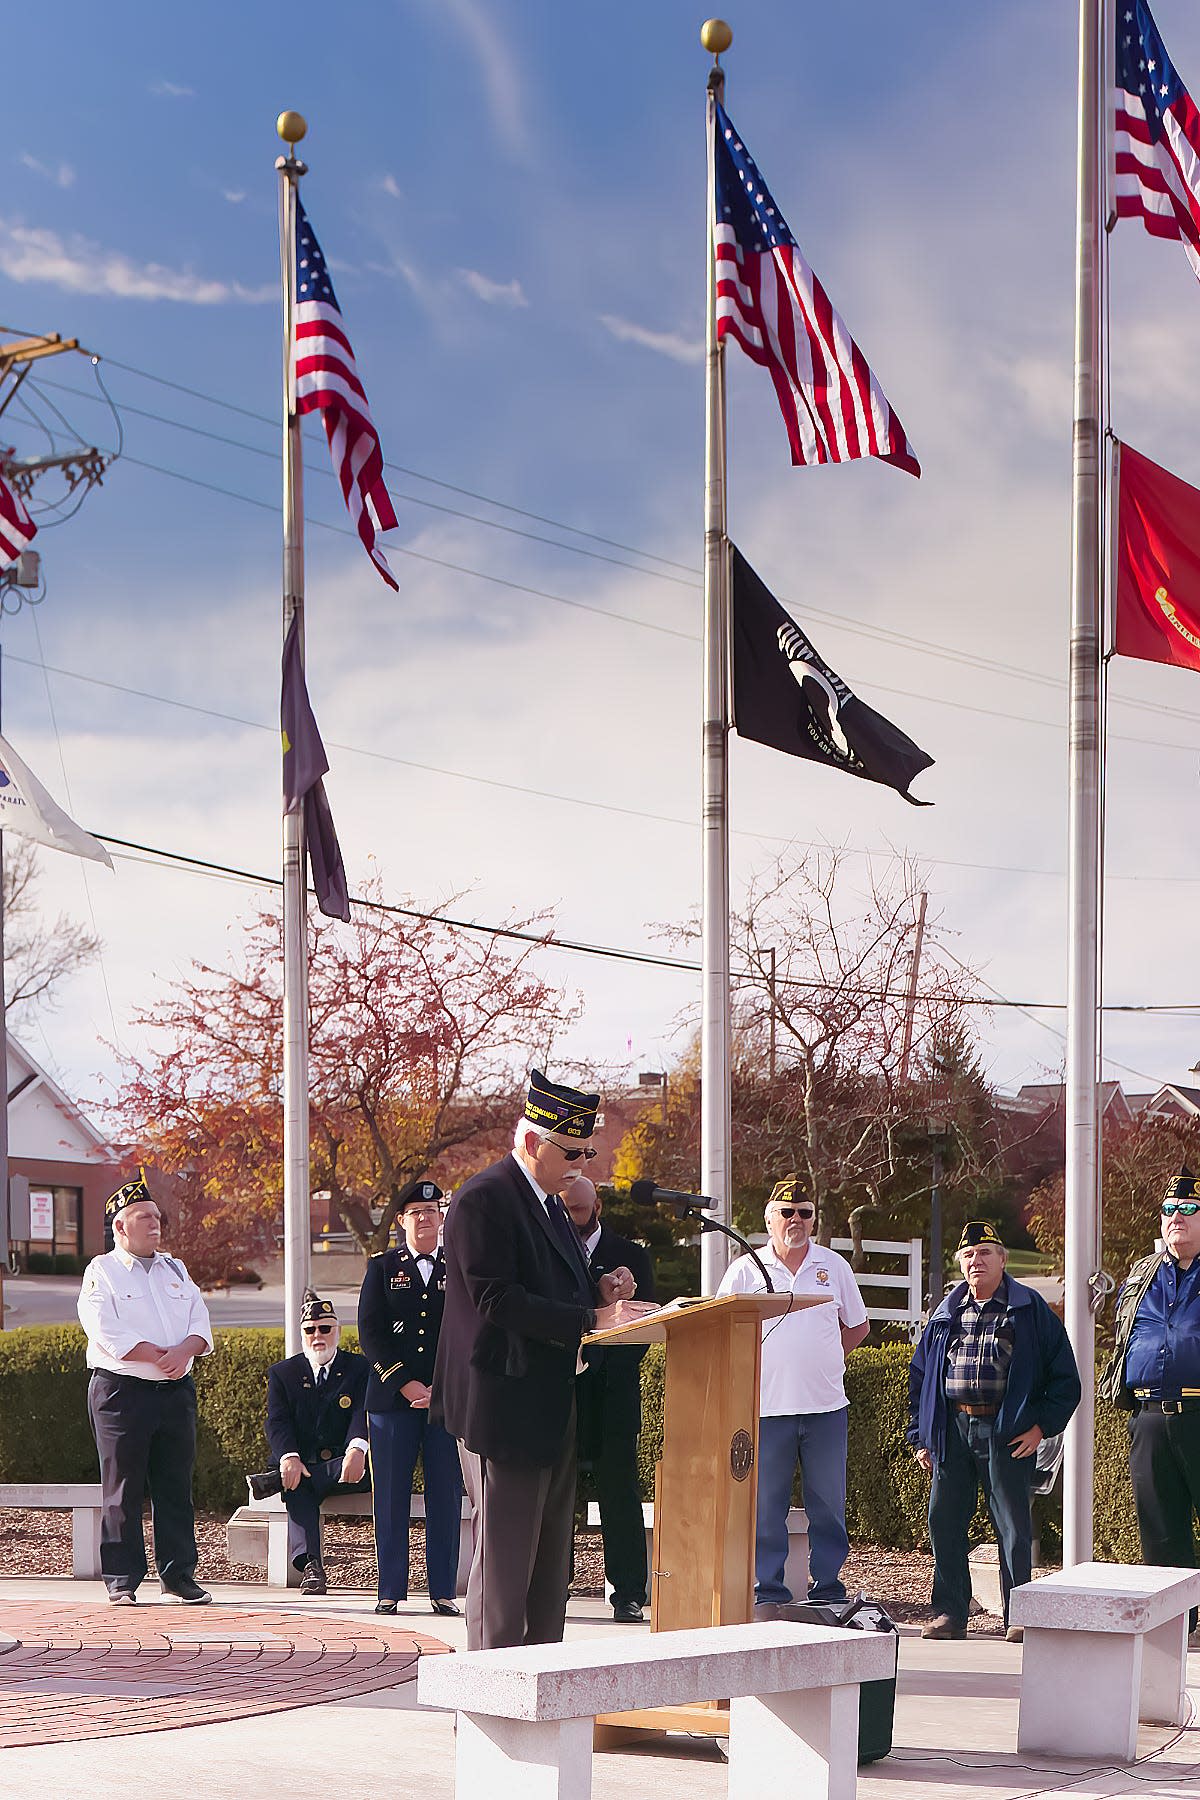 American Legion Post 803 and VFW Post 2629 will conduct a wreath laying ceremony May 30 (Memorial Day) at 10:15 a.m. at Veterans Memorial Park on Route 82 near Barrington Town Center. Pictured is a previous Memorial Day ceremony.